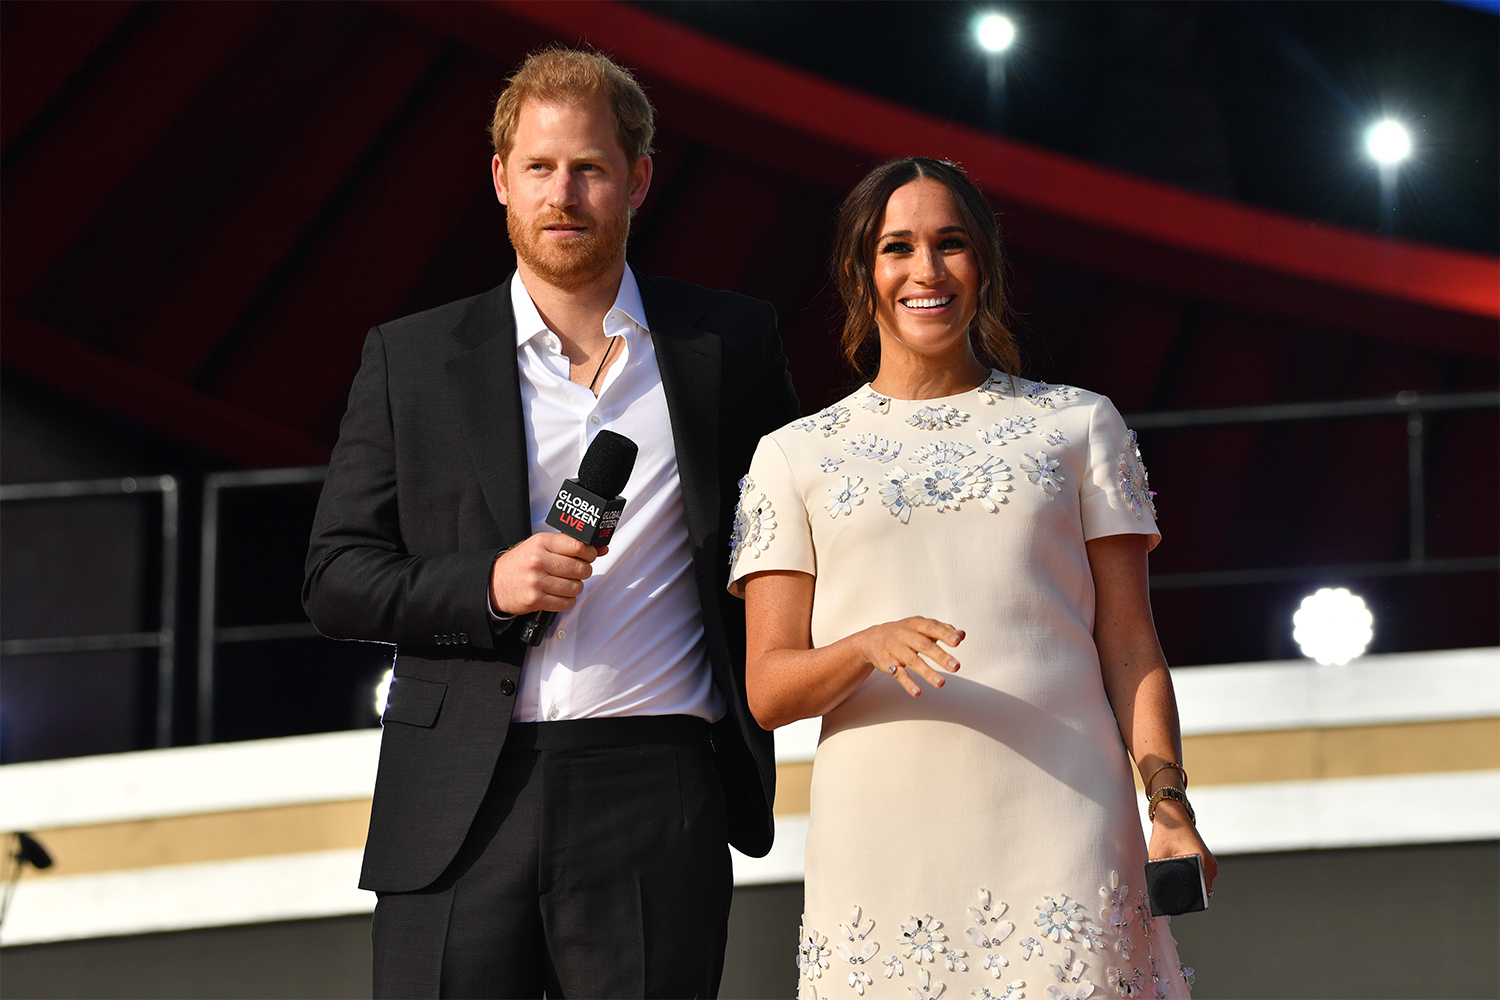 Prince Harry and Meghan Markle, the Duke and Duchess of Sussex, holding microphones onstage at Global Citizen Live on September 25, 2021 in New York City